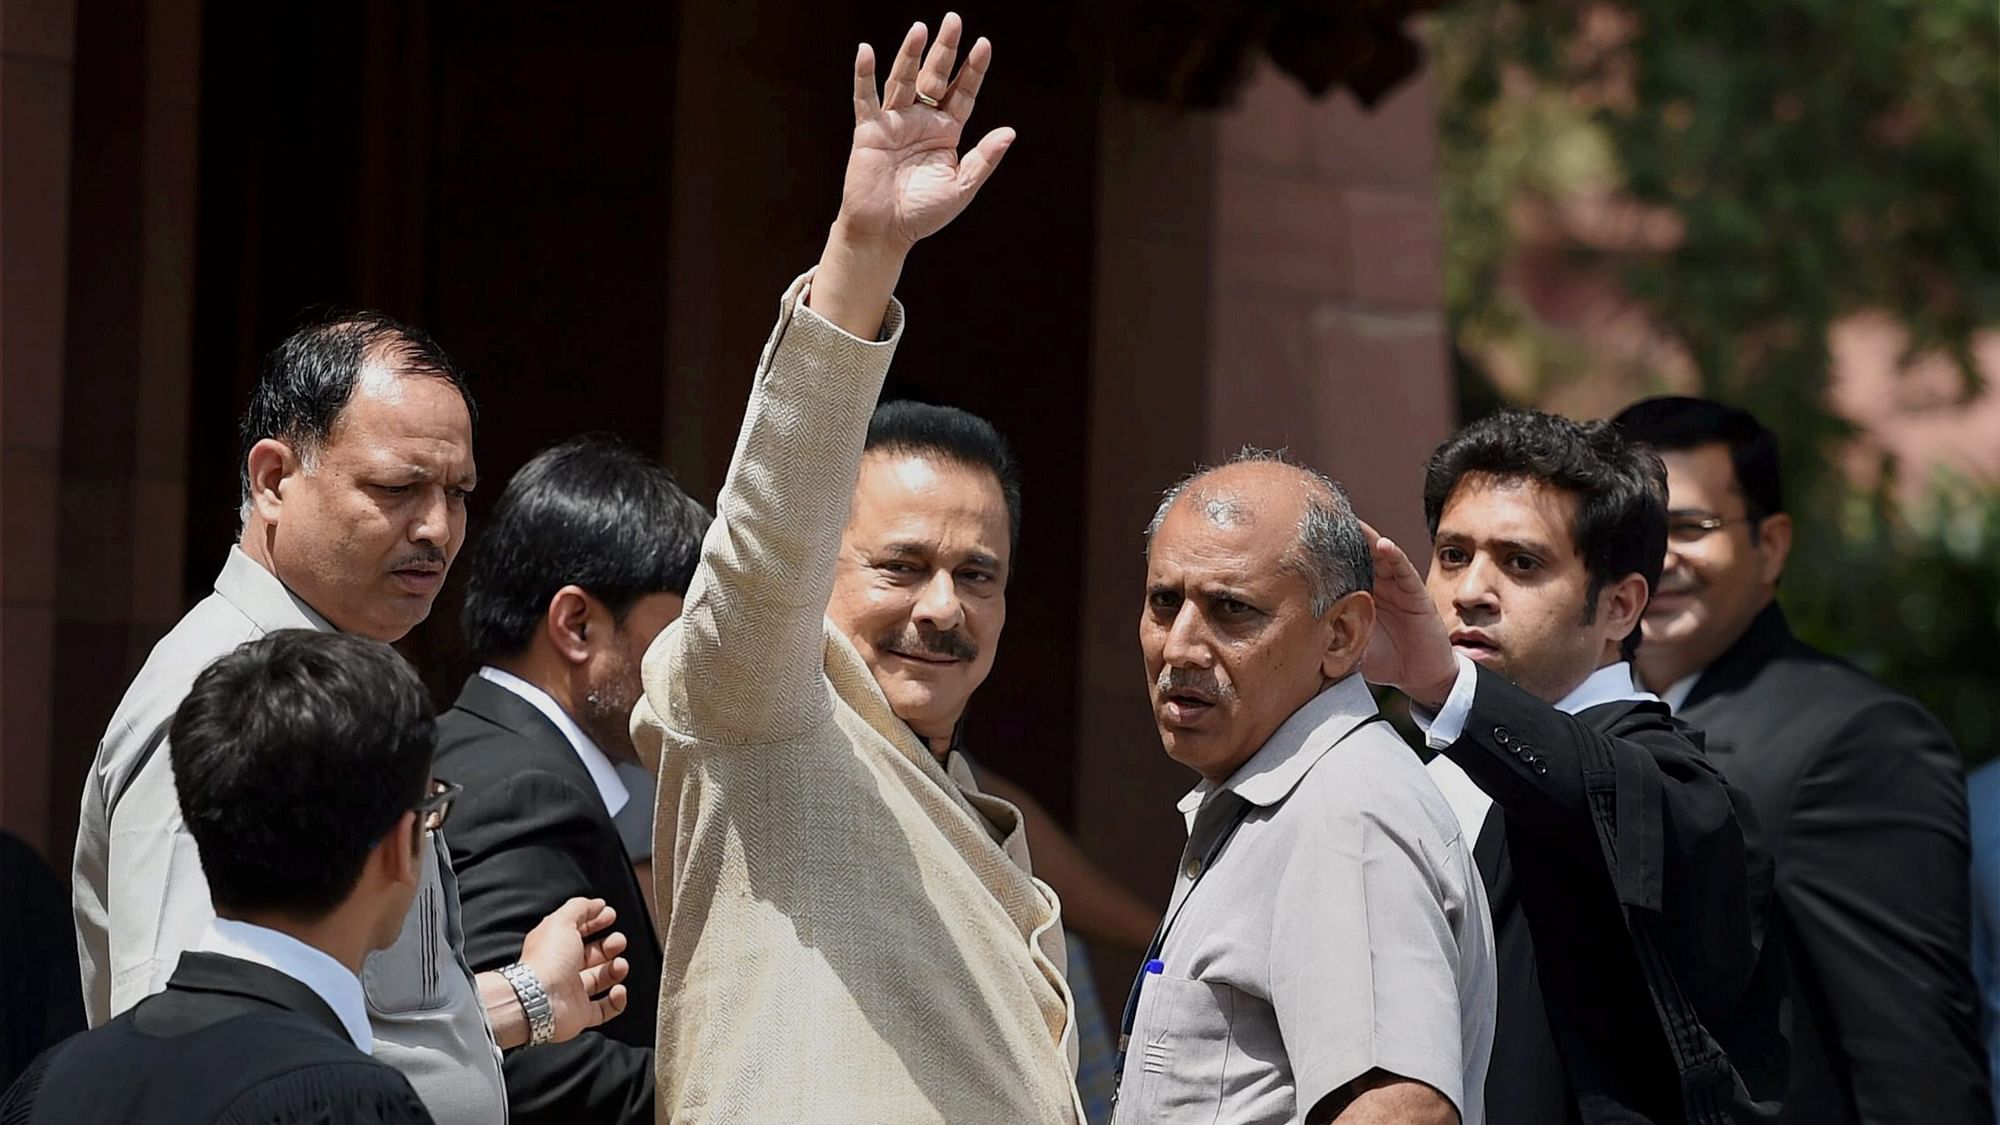 <div class="paragraphs"><p>Subrata Roy, founder of Sahara India Parivar, died in Mumbai on 14 November, at the age of 75 after a prolonged illness. His group spans across various sectors including finance, media, entertainment and real estate.</p></div>